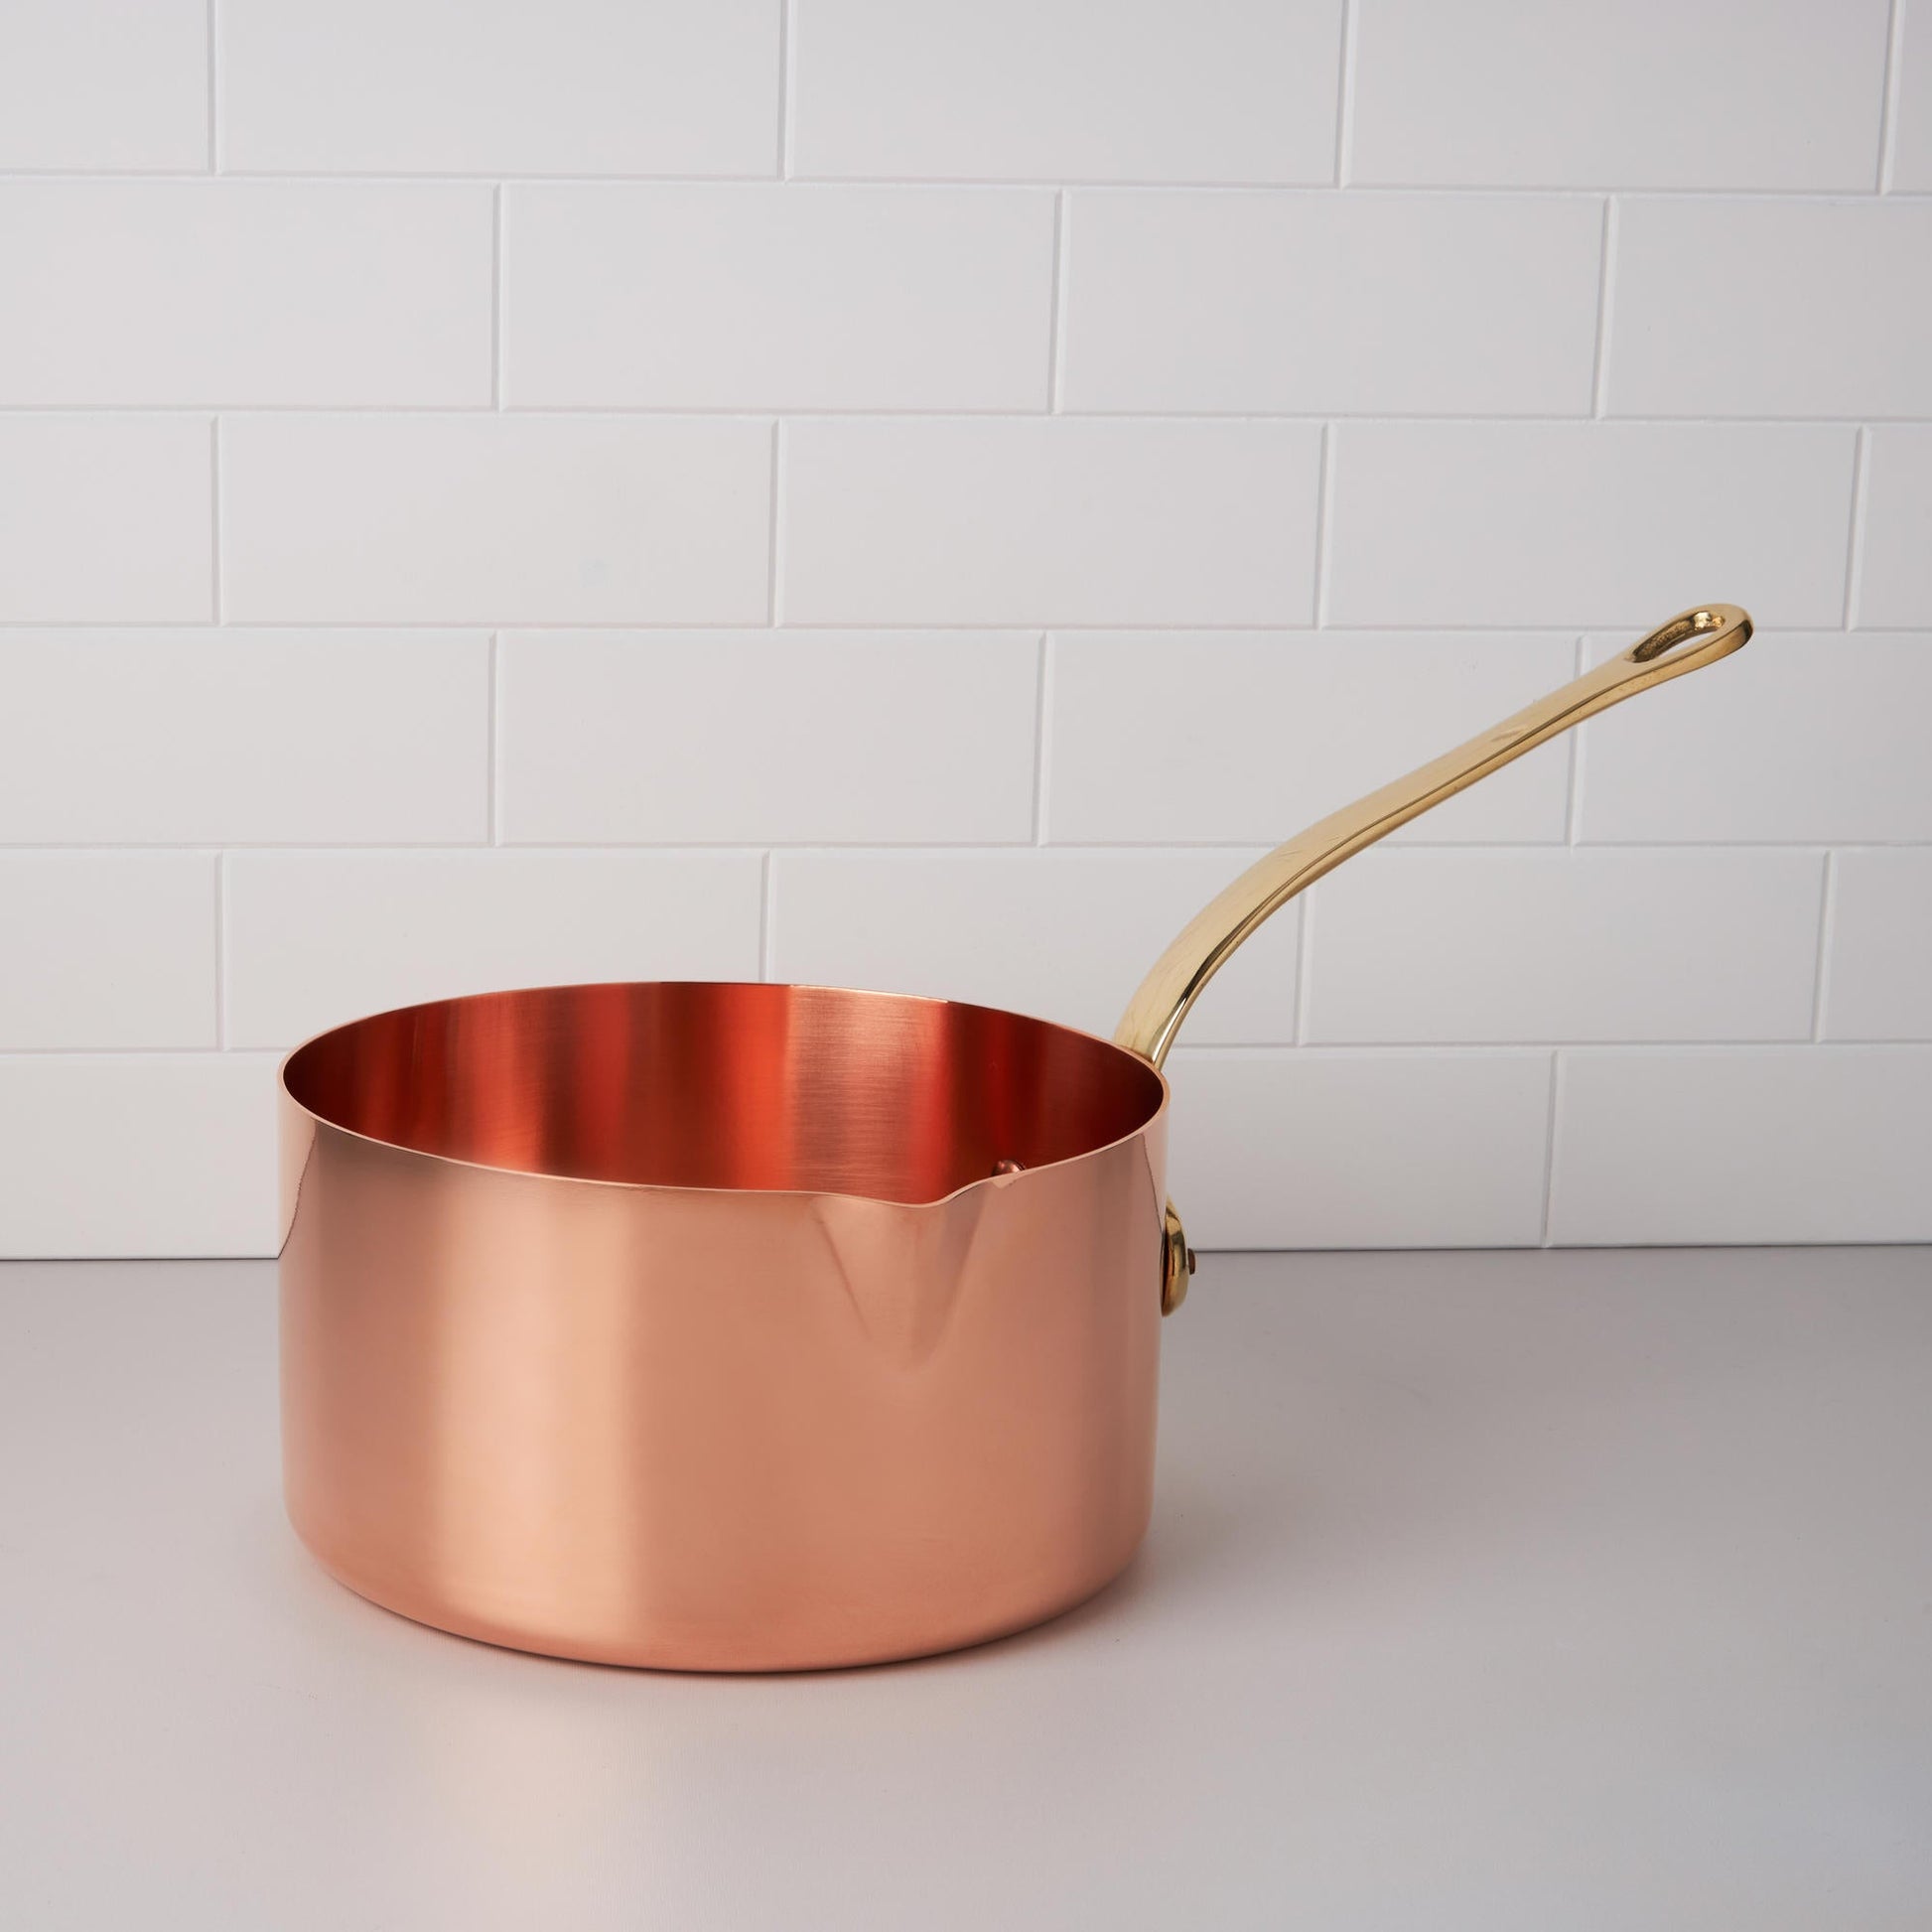 Ruffoni specialty sugar saucepan in solid copper. Unlined.